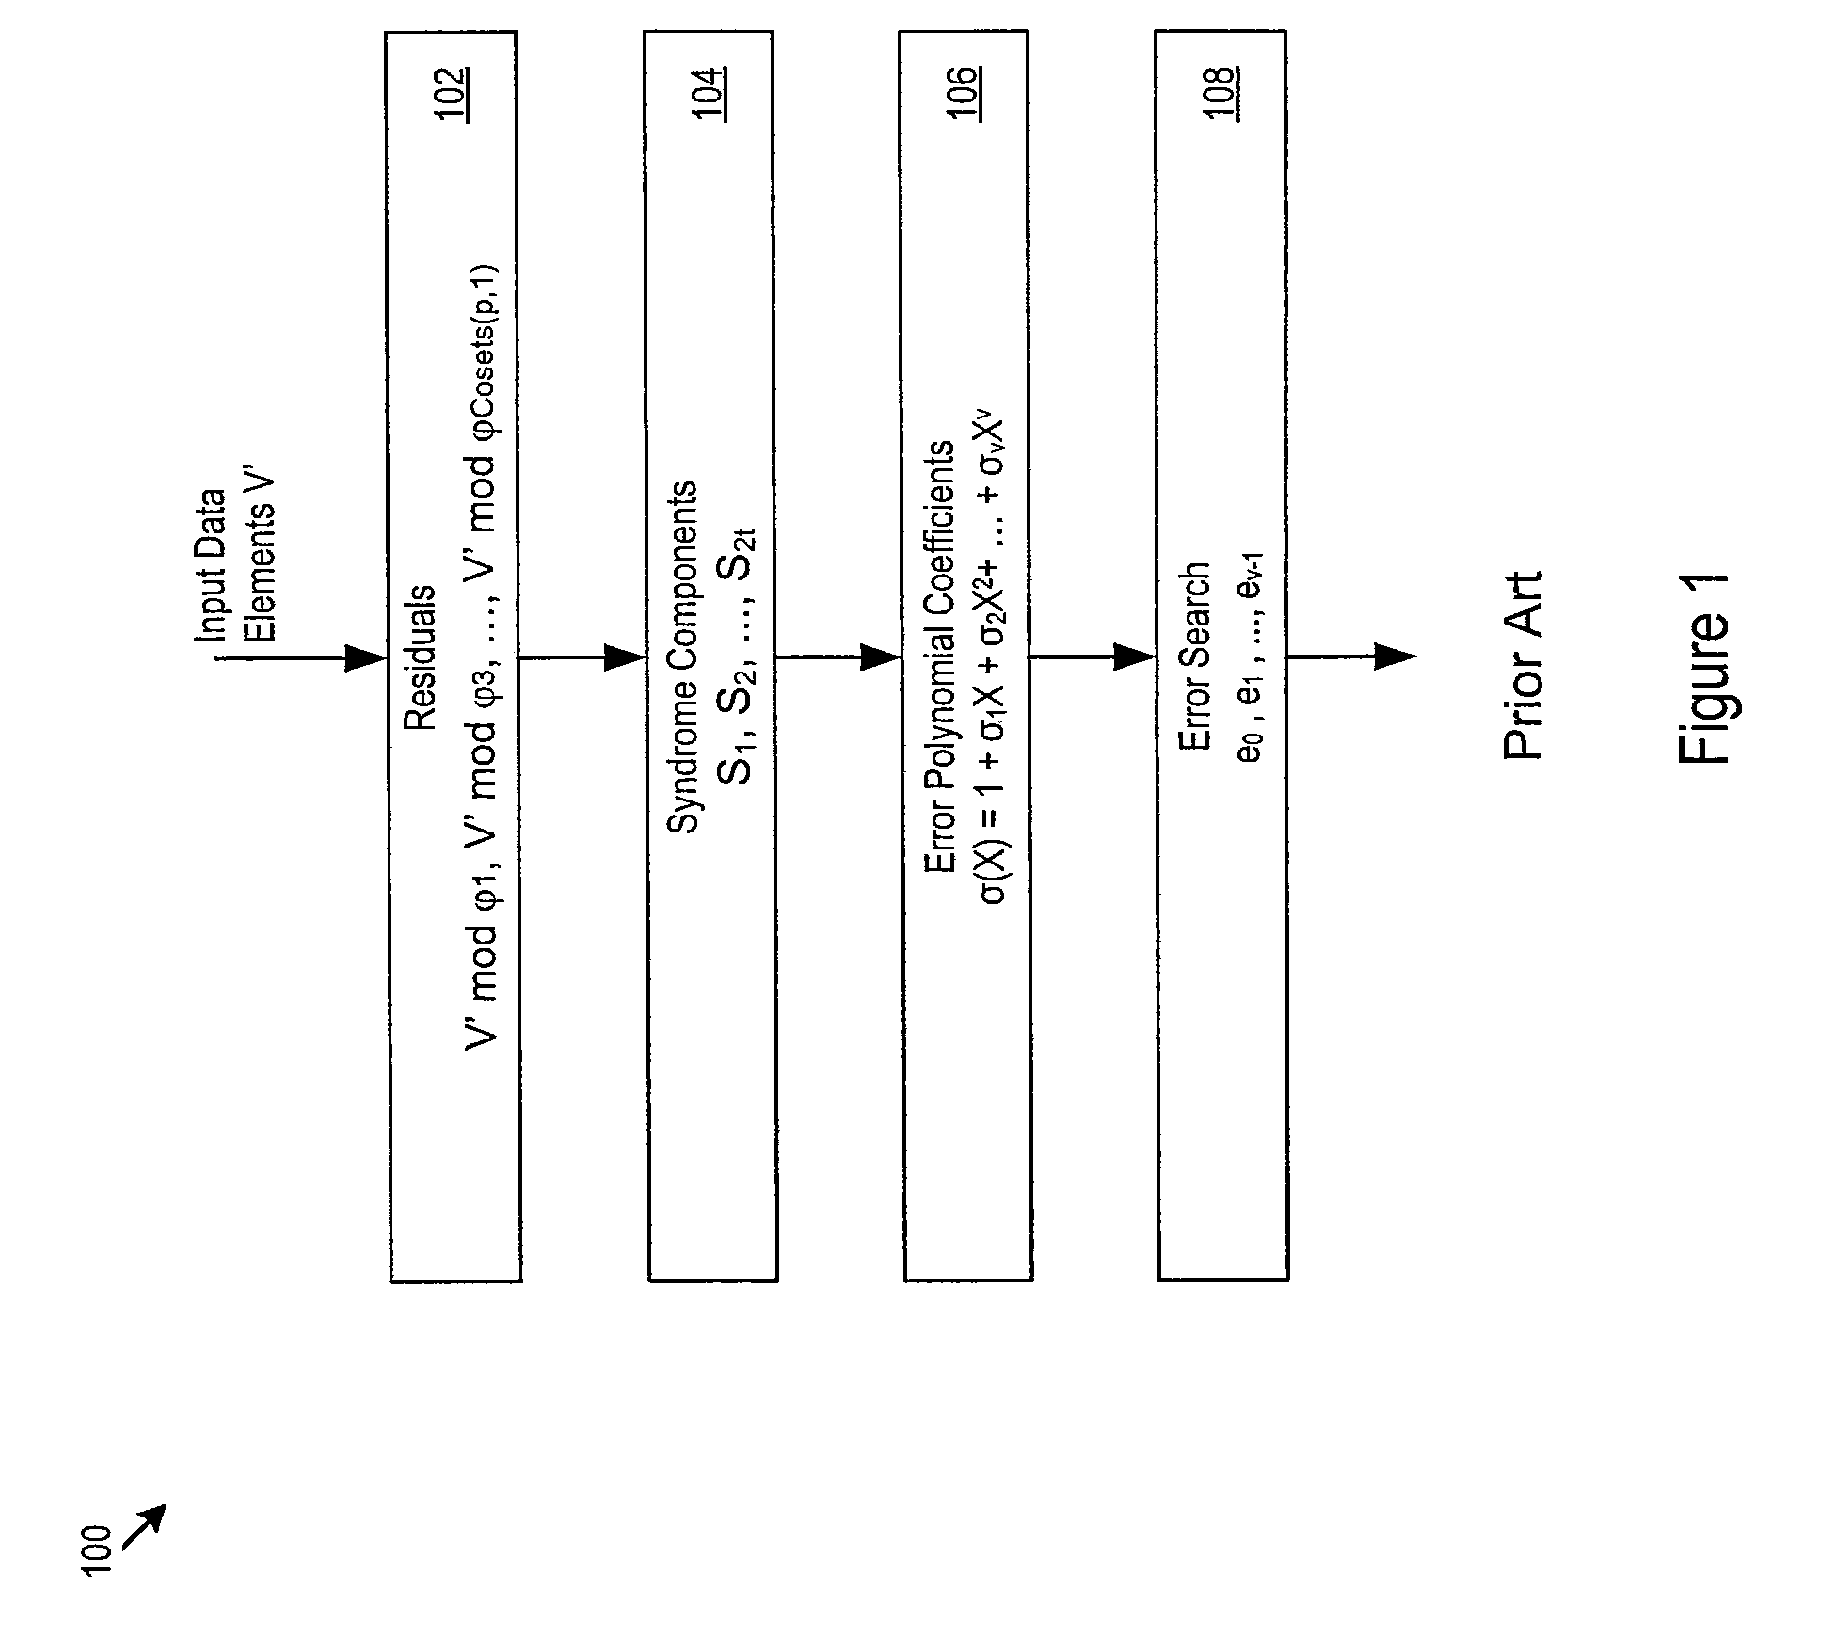 Parallelization of Error Analysis Circuitry for Reduced Power Consumption